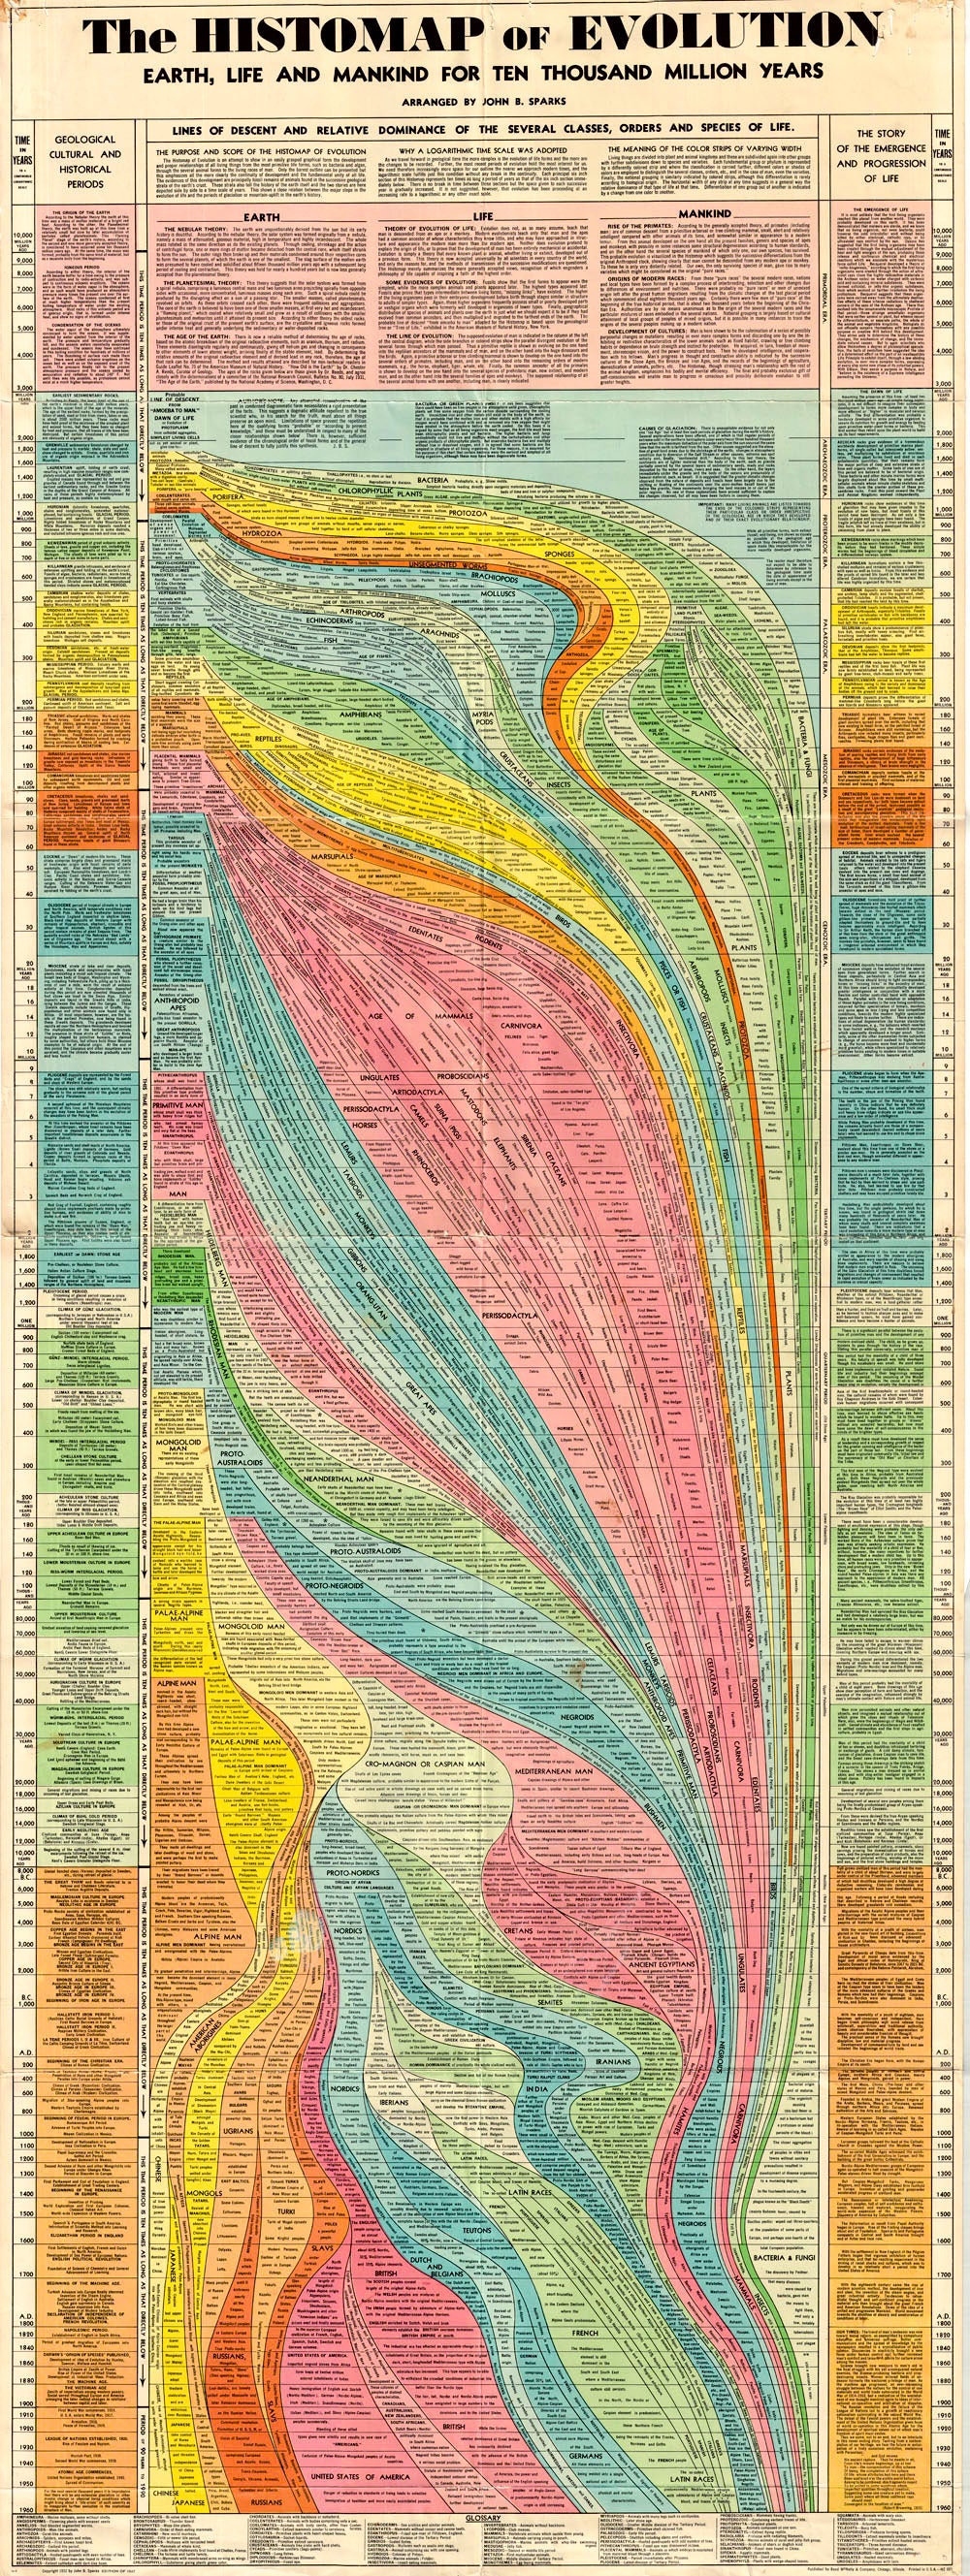 (Thematic) The Histomap of Evolution - Earth, Life and Mankind for Ten Thousand Million Years, John B. Sparks - Rand McNally, c.1955